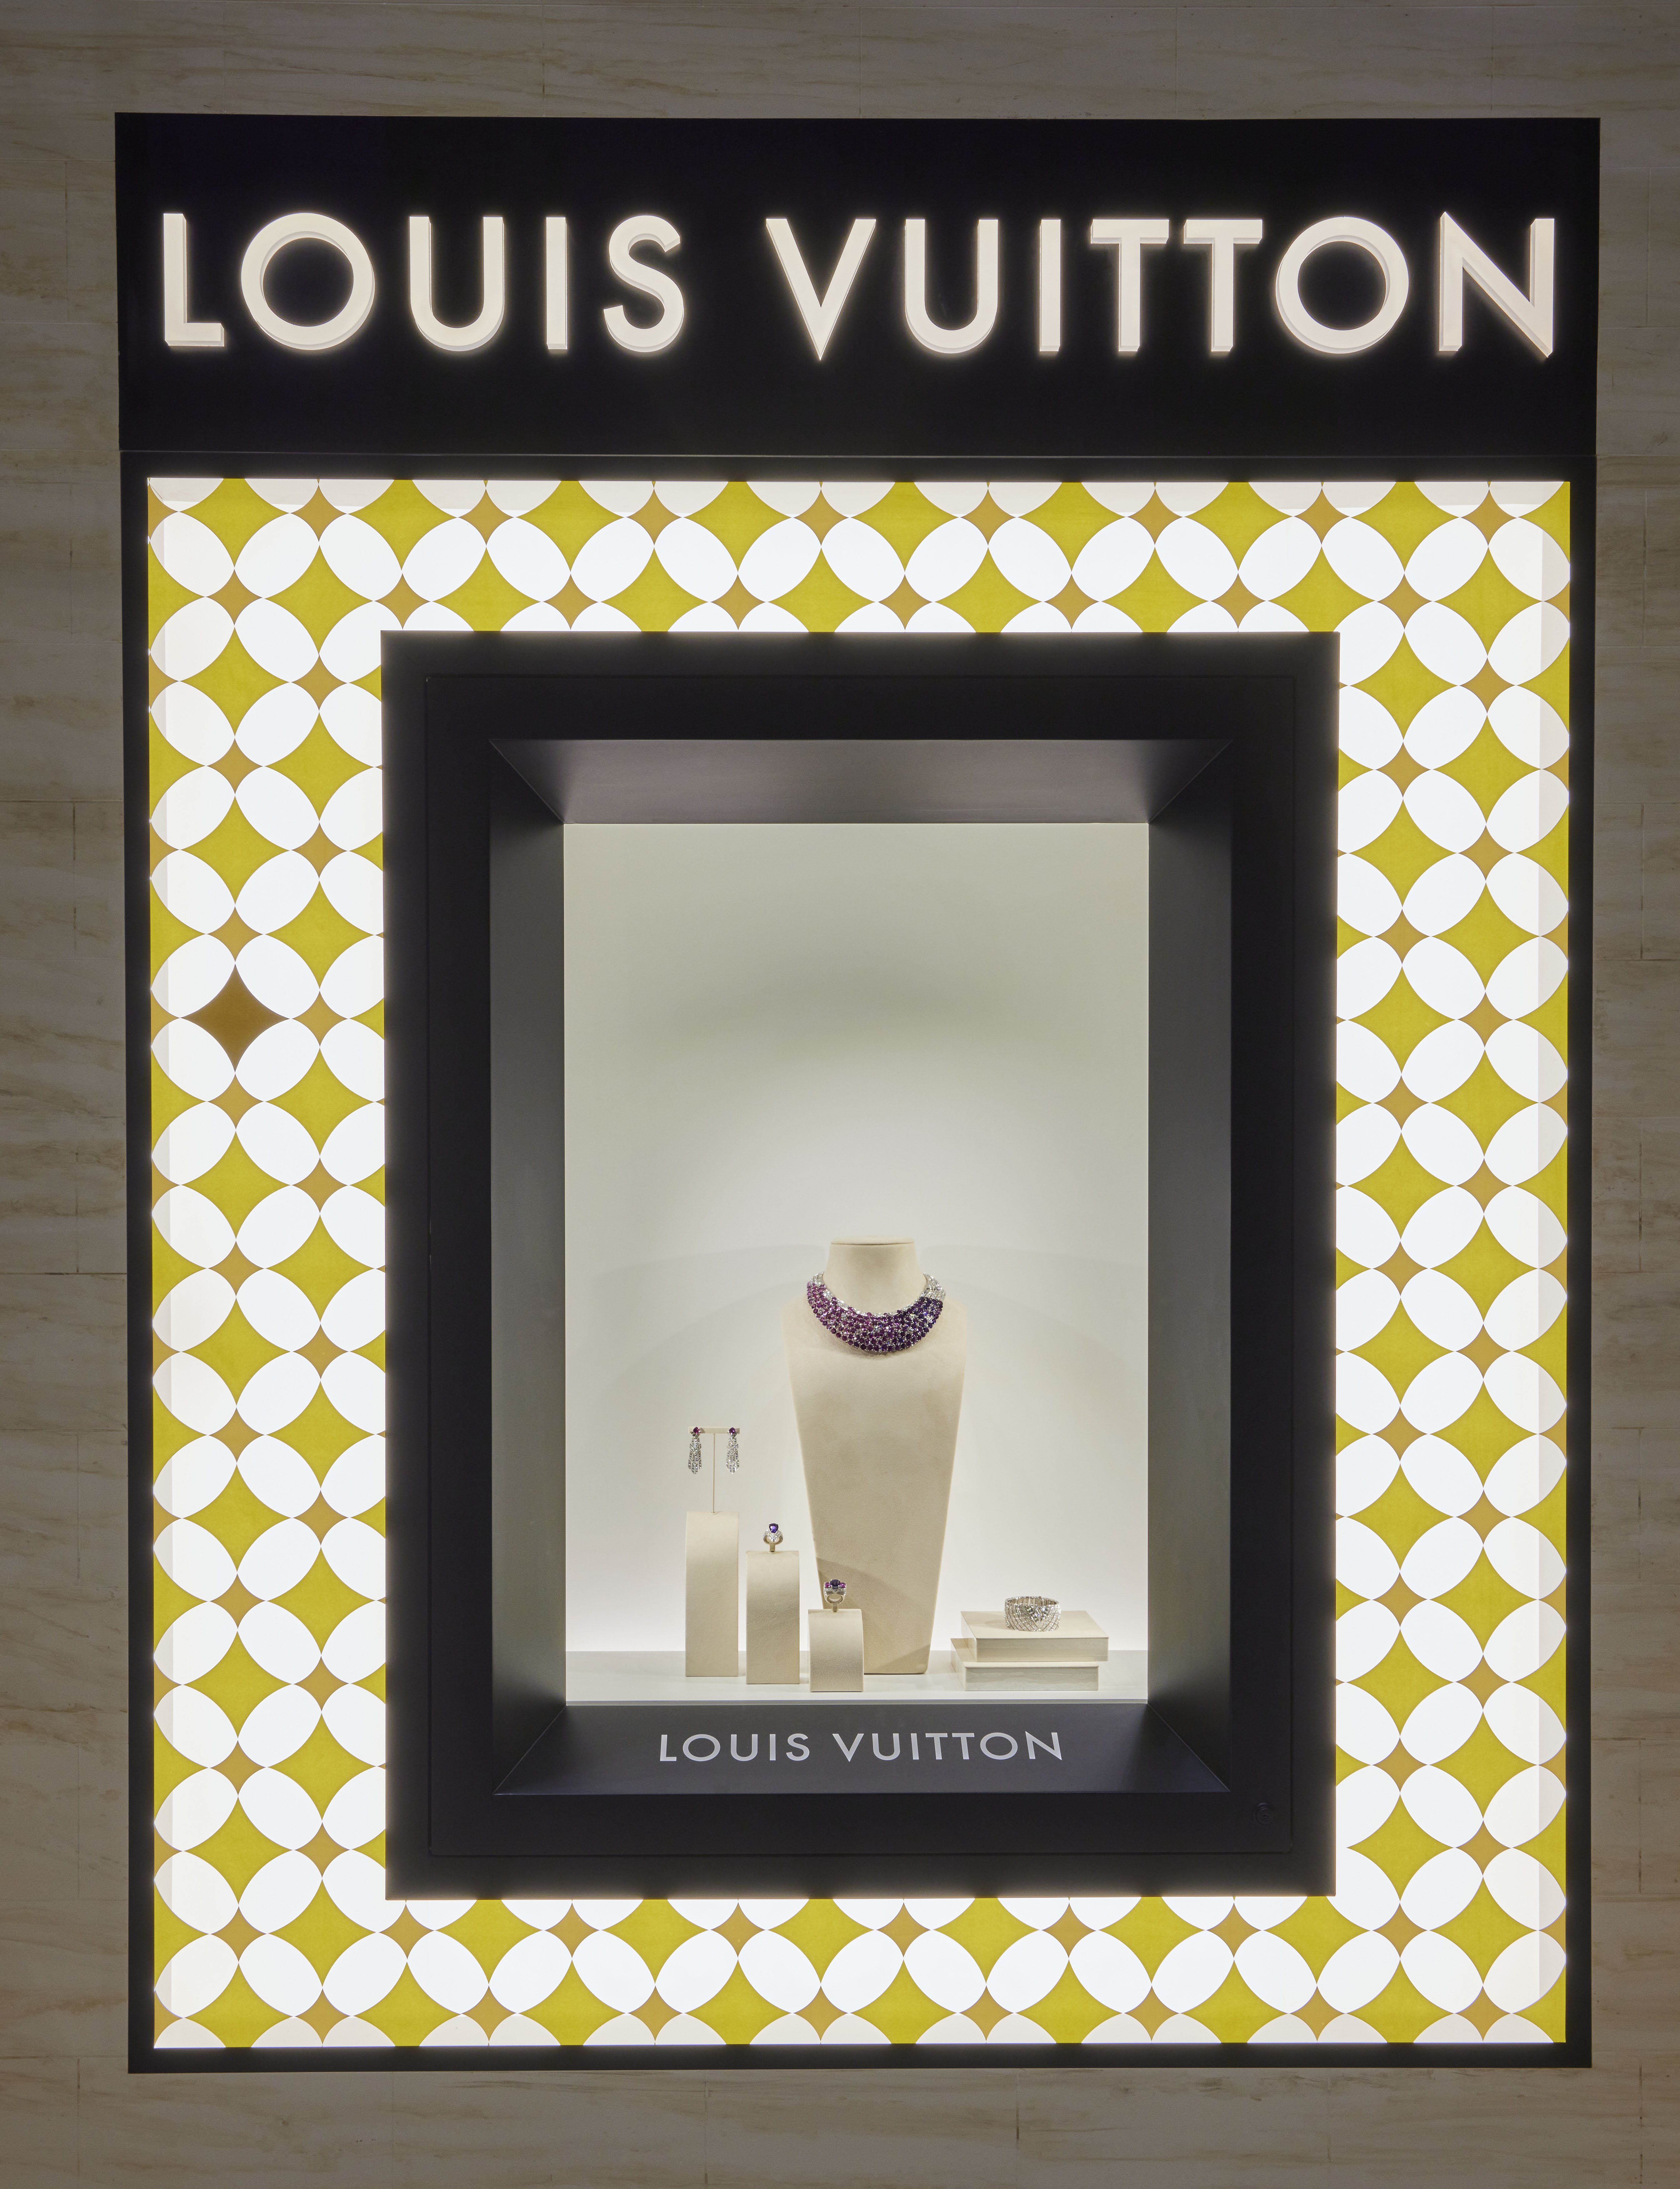 Louis Vuitton to take centre stage at HIA in 'first' for Qatar